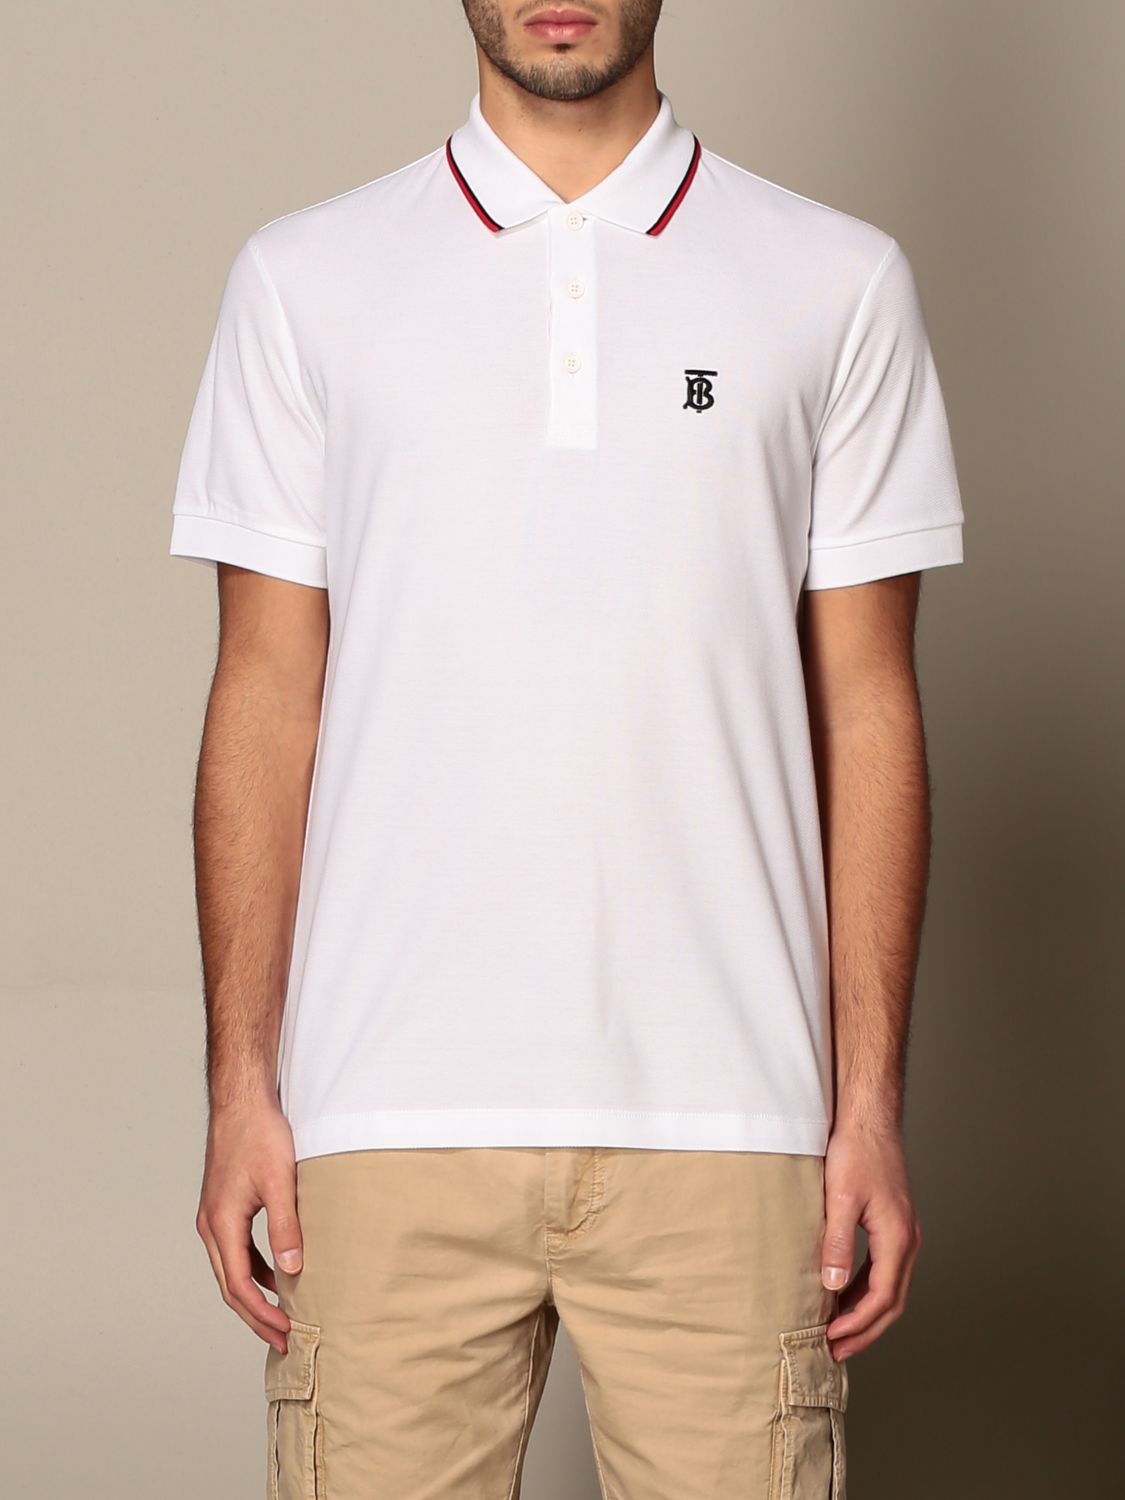 BURBERRY: Walton with TB - White | Burberry polo shirt 8017004 online on GIGLIO.COM